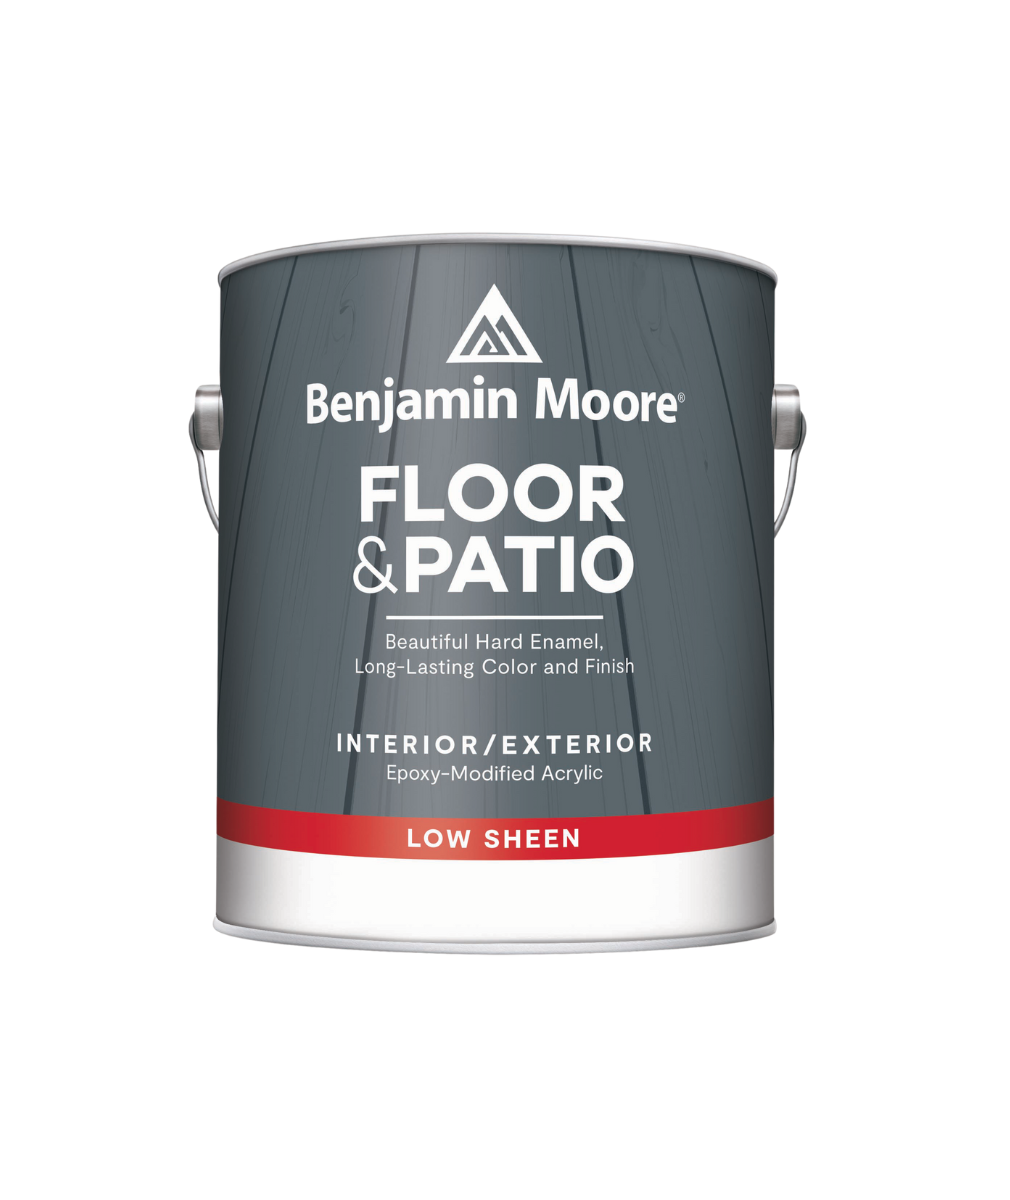 Benjamin Moore floor and patio low sheen Interior Paint available at Regal Paint Centers.